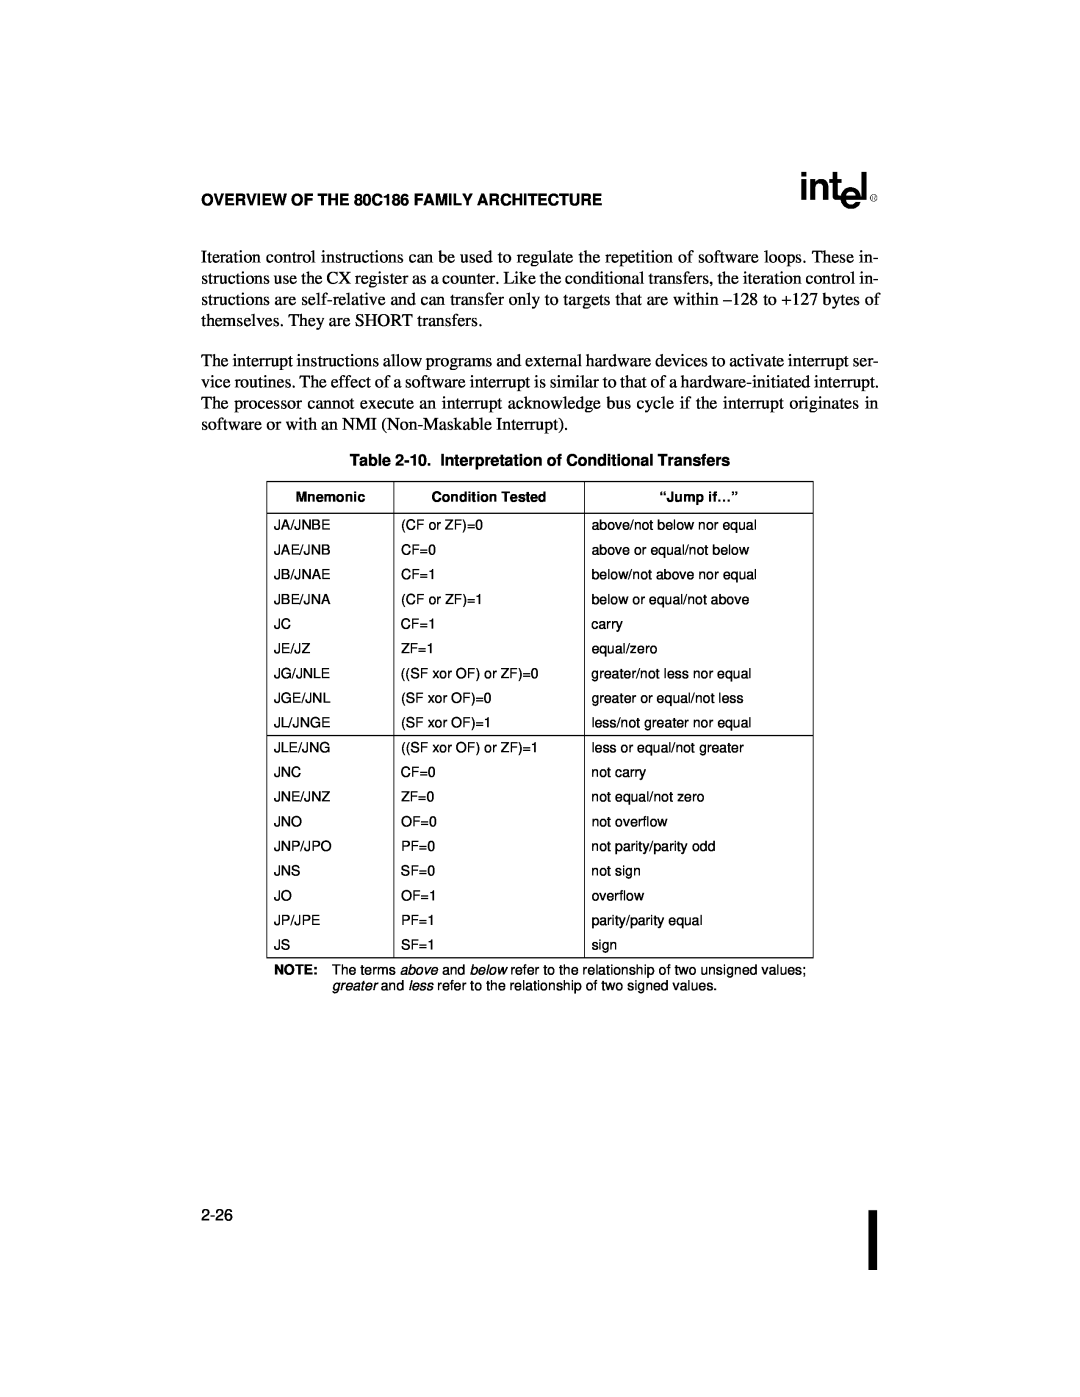 Intel 80C186XL, 80C188XL user manual OVERVIEW OF THE 80C186 FAMILY ARCHITECTURE, Mnemonic, Condition Tested, “Jump if…” 